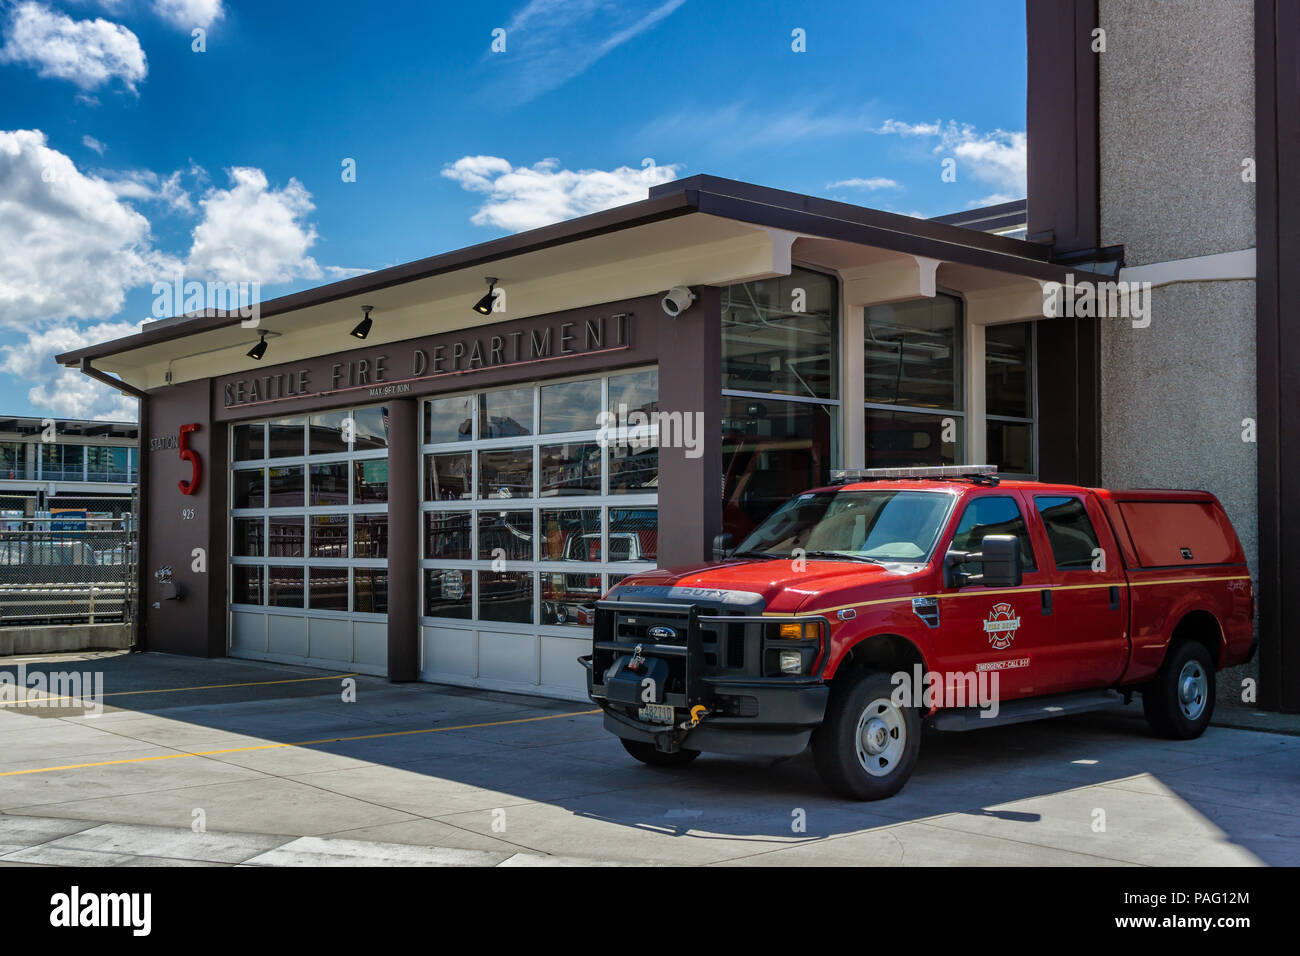 Seattle Fire Department Station 5 front building with a parked emergency car, Seattle waterfront, WA, USA. Stock Photo